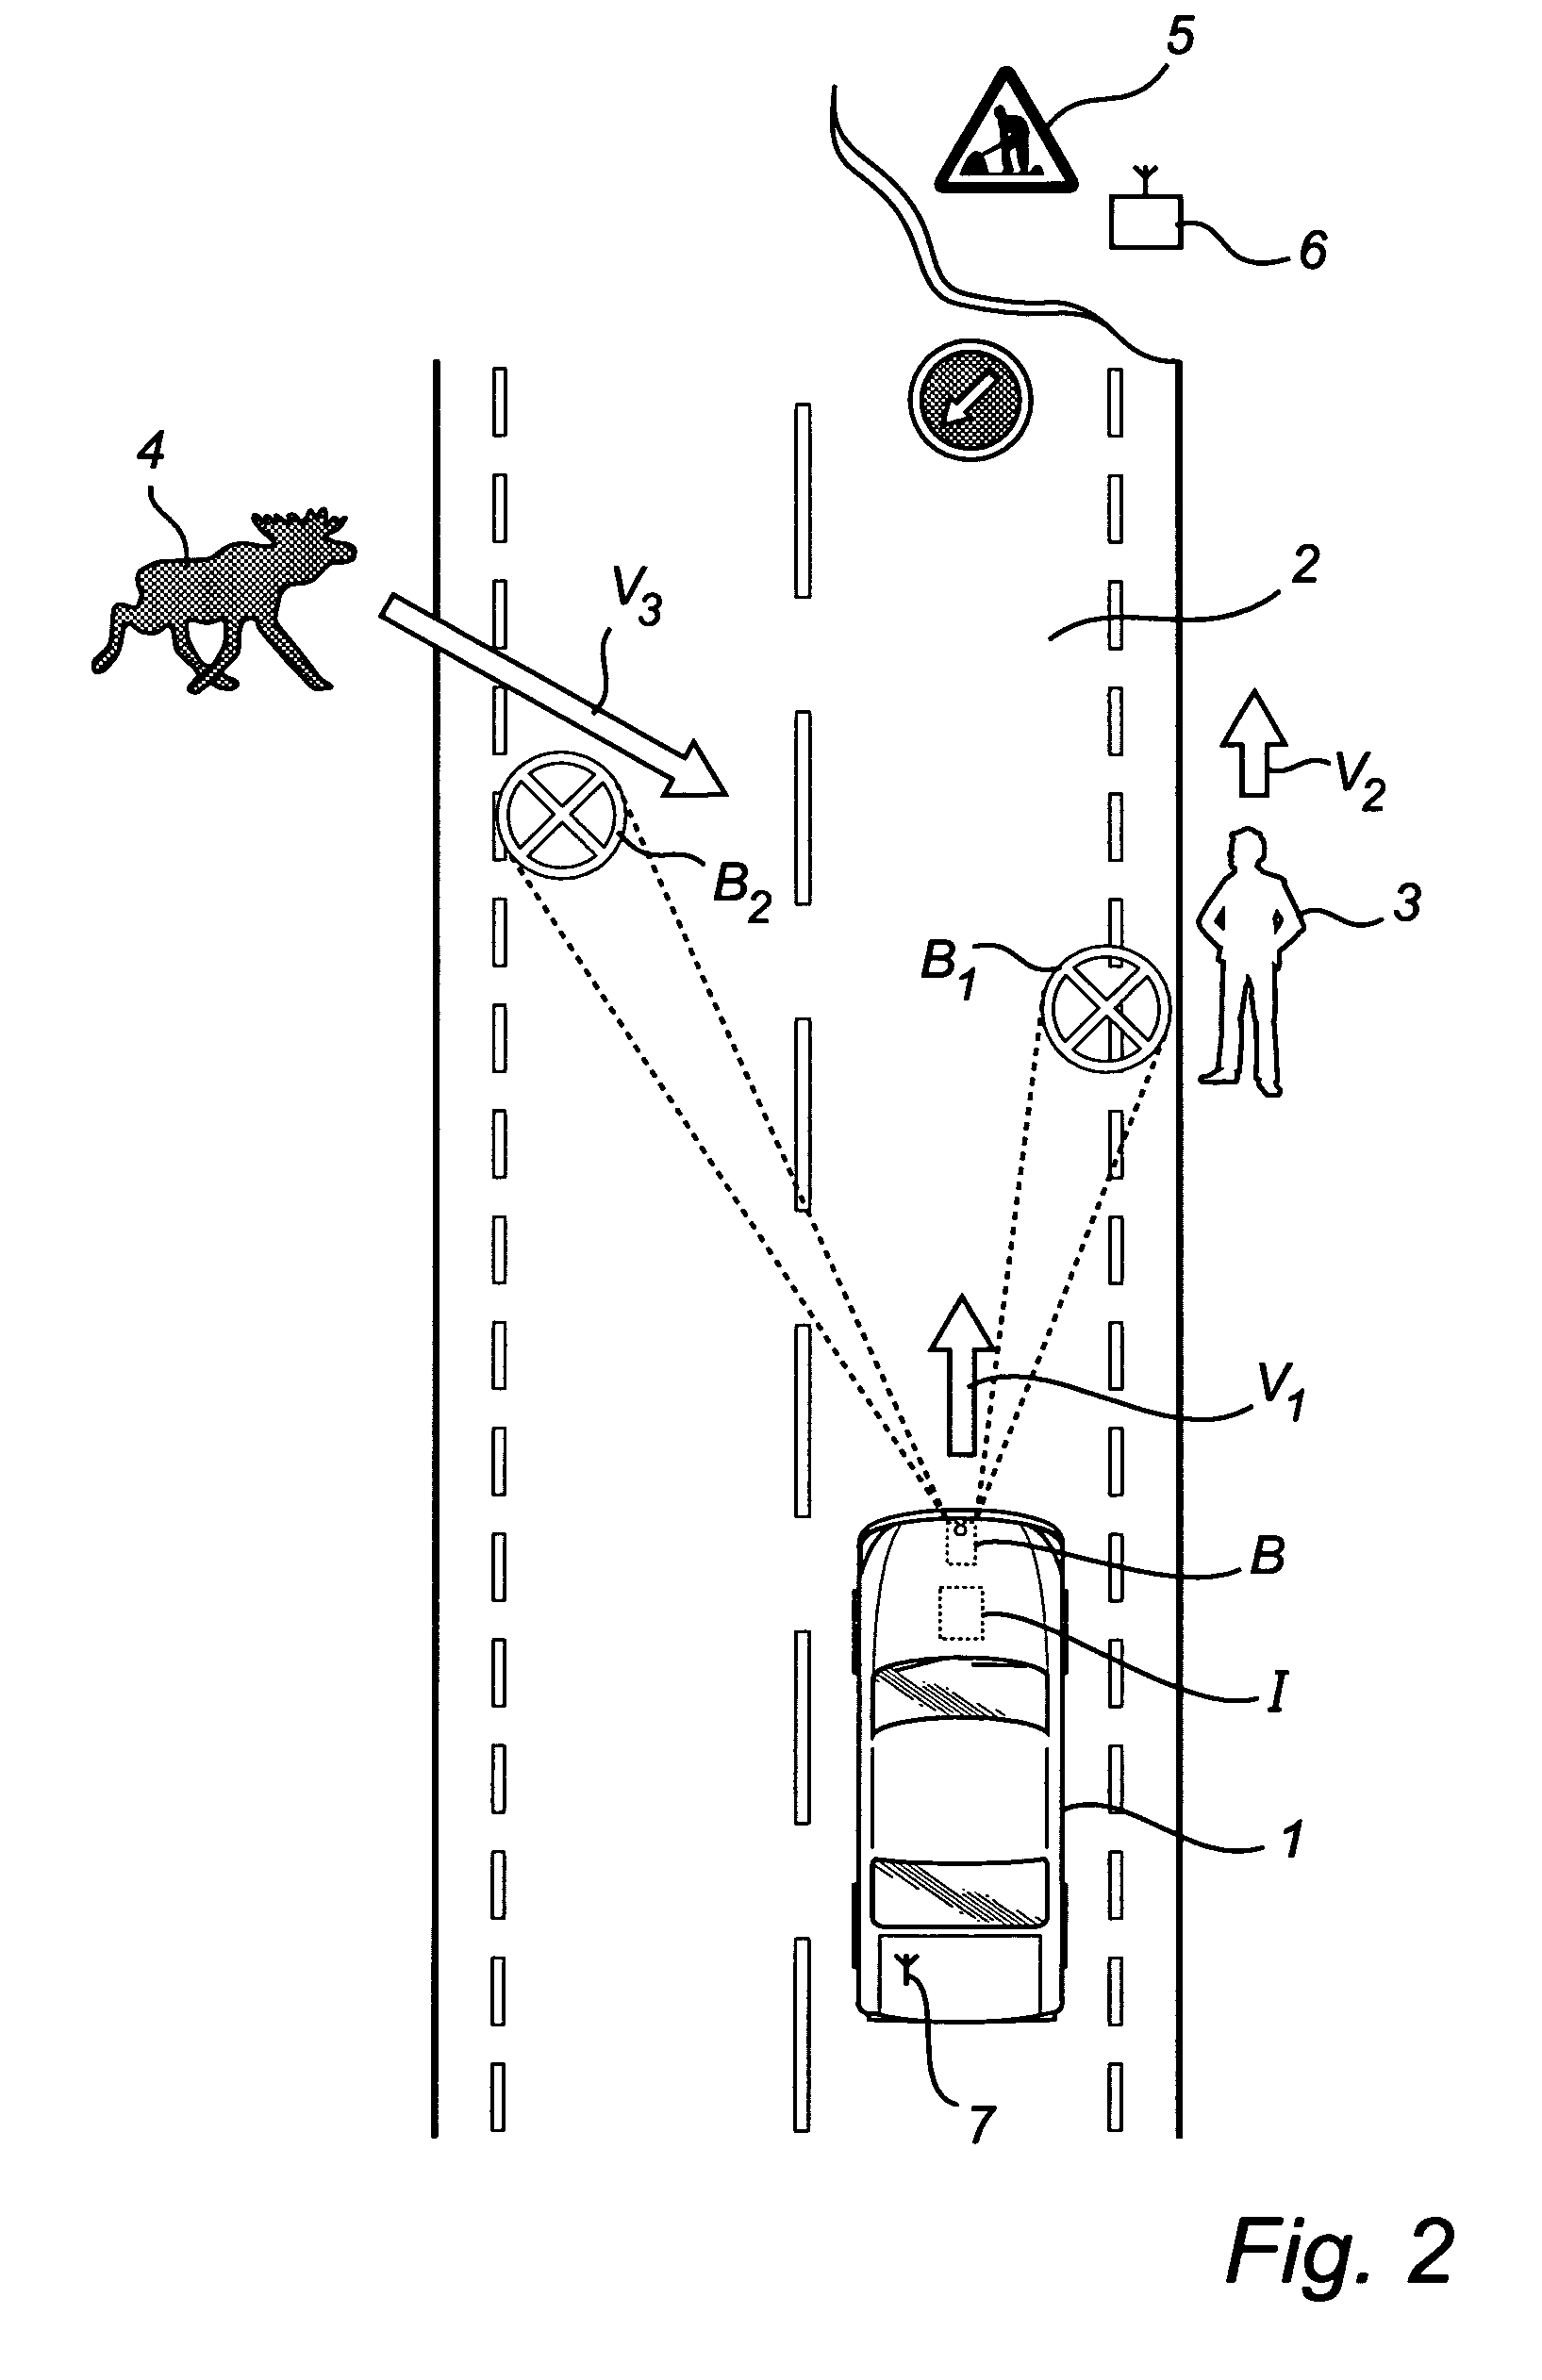 Method and system for improving traffic safety